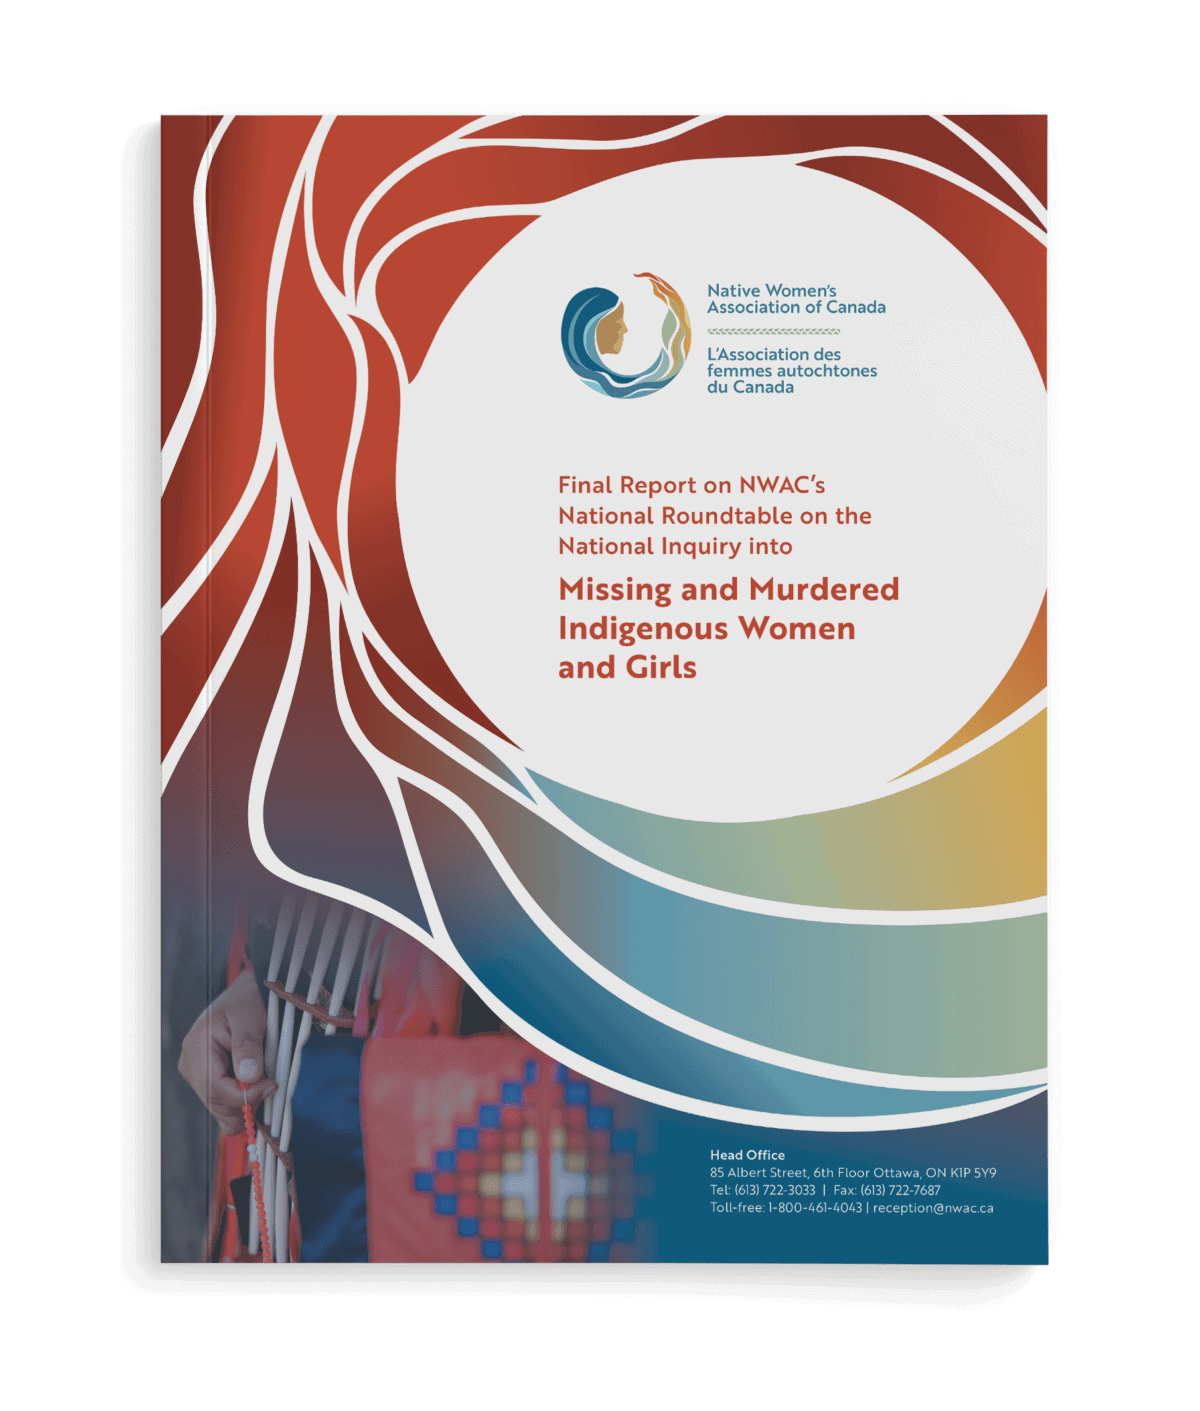 The cover for the NWAC report on Missing and Murdered Indigenous Women and Girls. The cover features a red wave pattern that transitions to blue, yellow, and green towards the bottom, with a white circle in the top right for the title which reads "Final Report on NWAC's National Round table on the National Inquiry Into Missing and Murdered Indigenous Women and Girls.